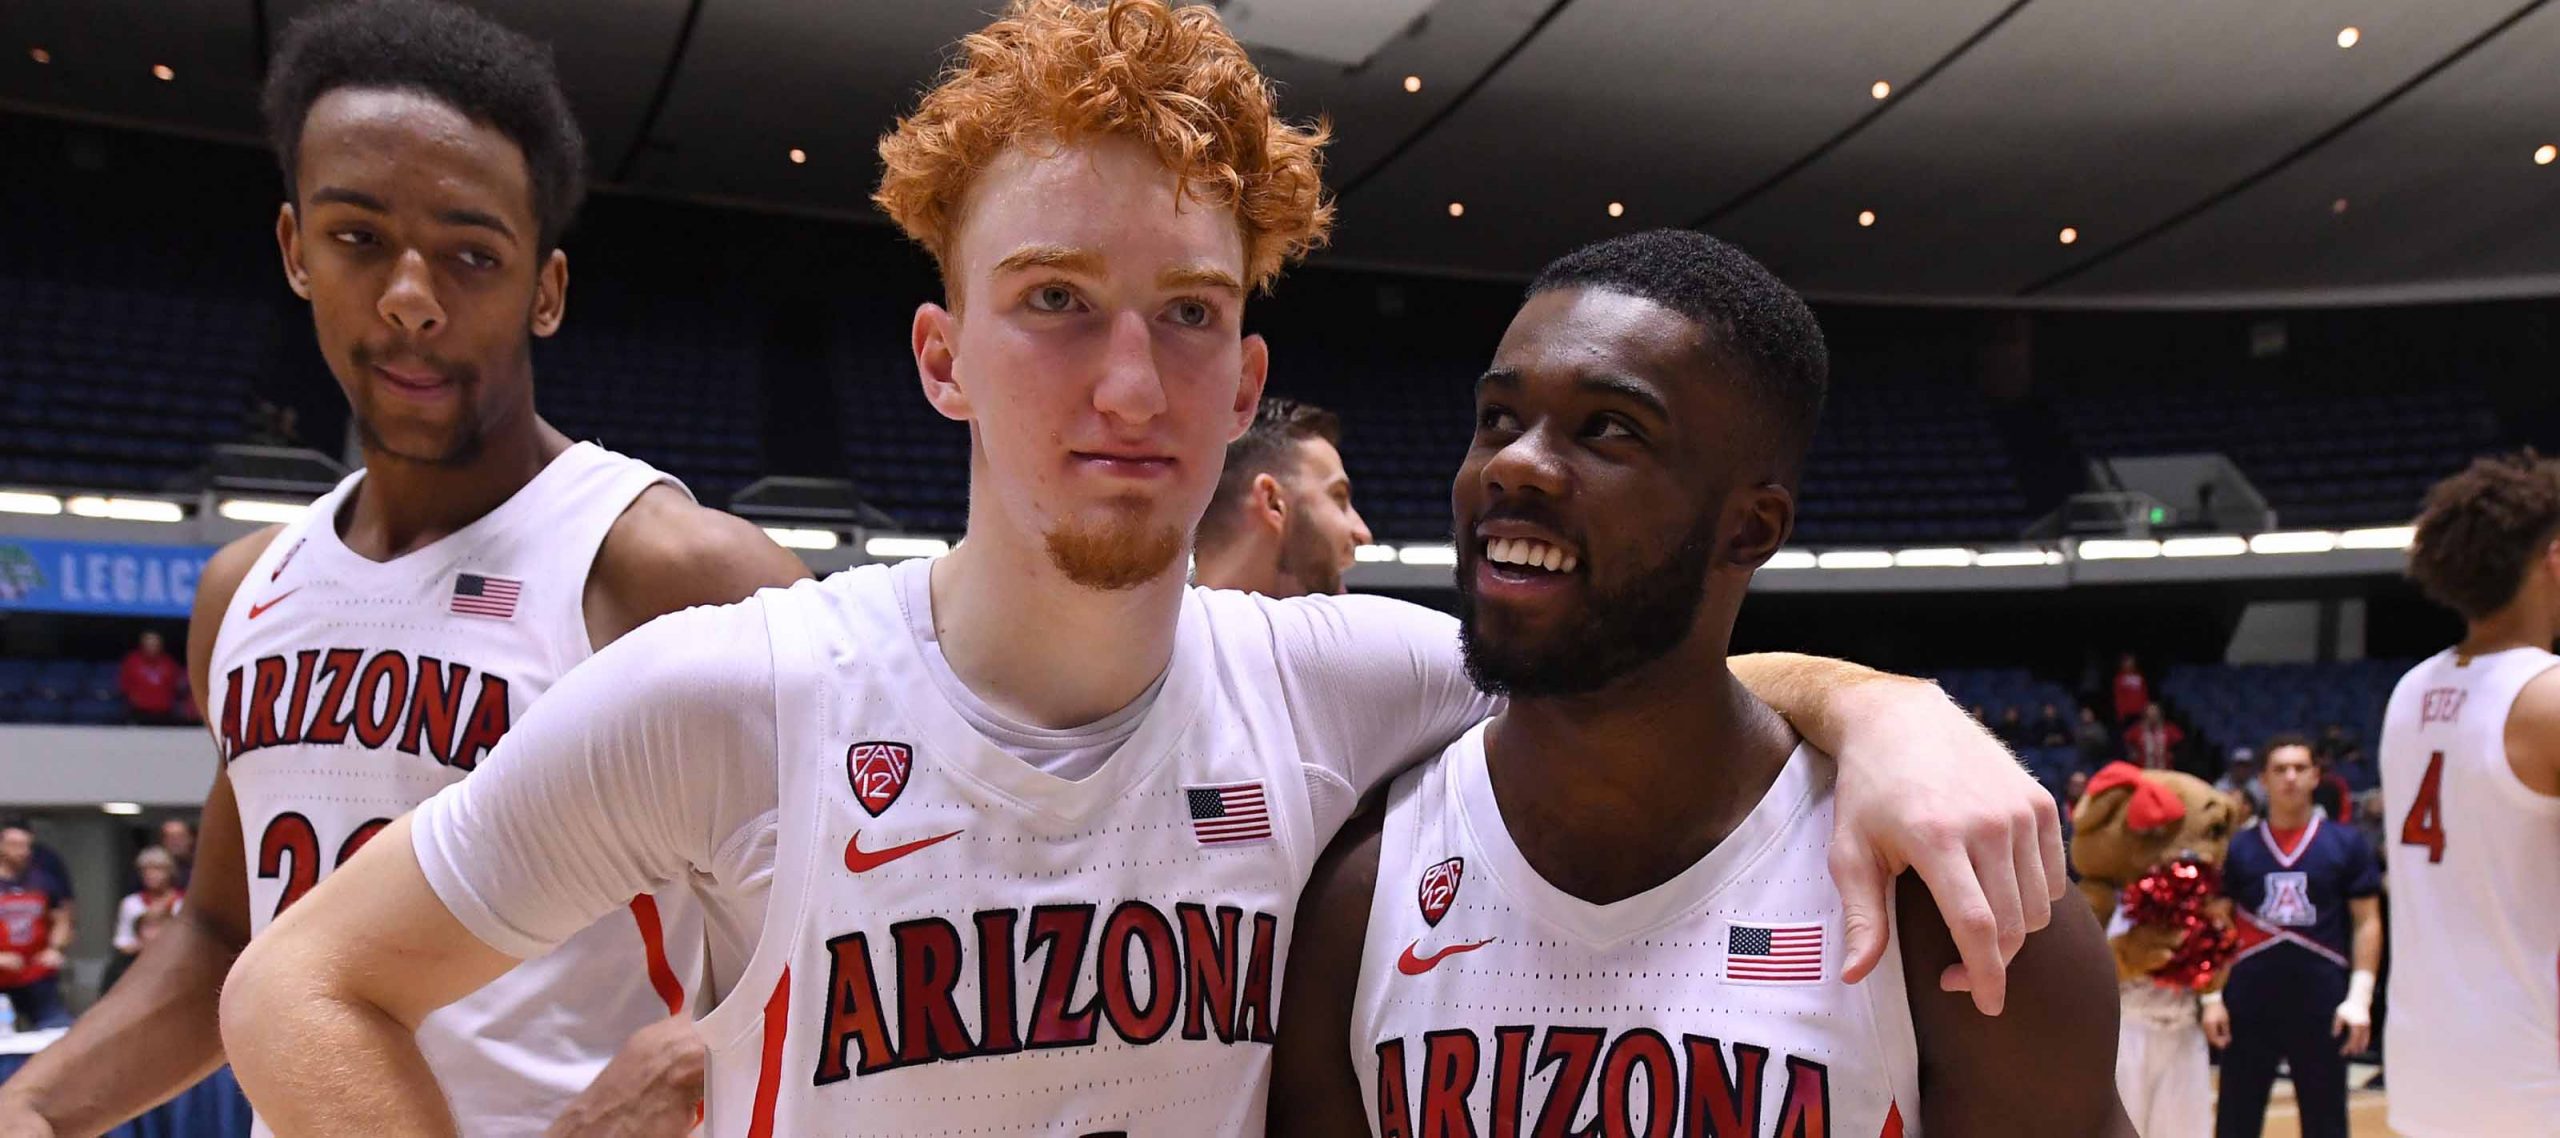 Stanford vs #2 Arizona College Basketball Game Preview and Betting Odds